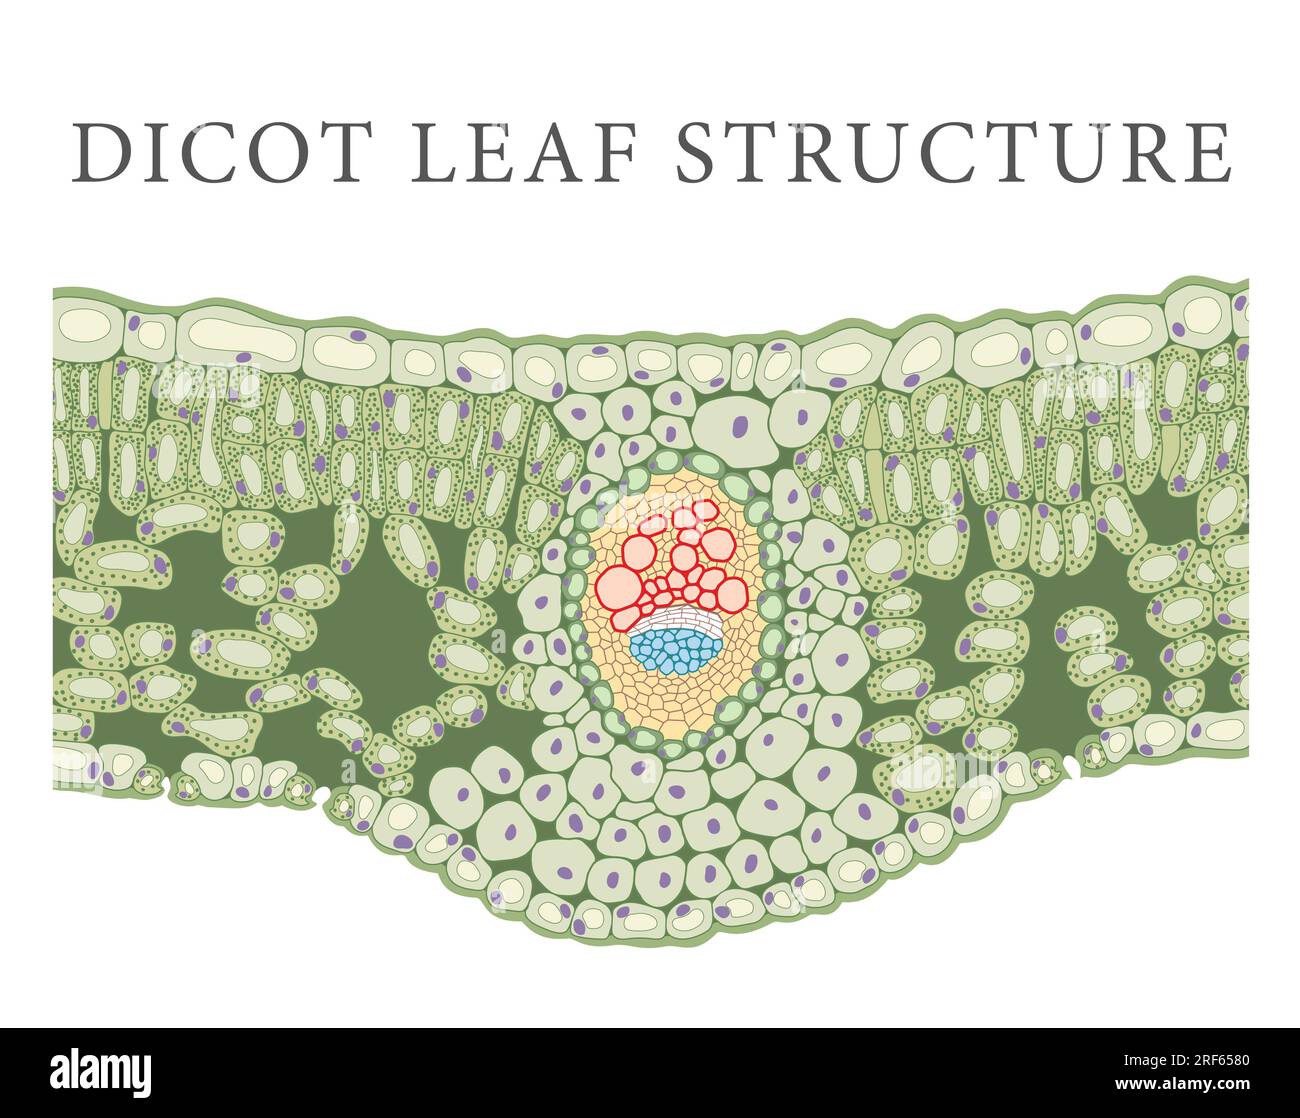 Internal Structure of dicot leaf Stock Photo